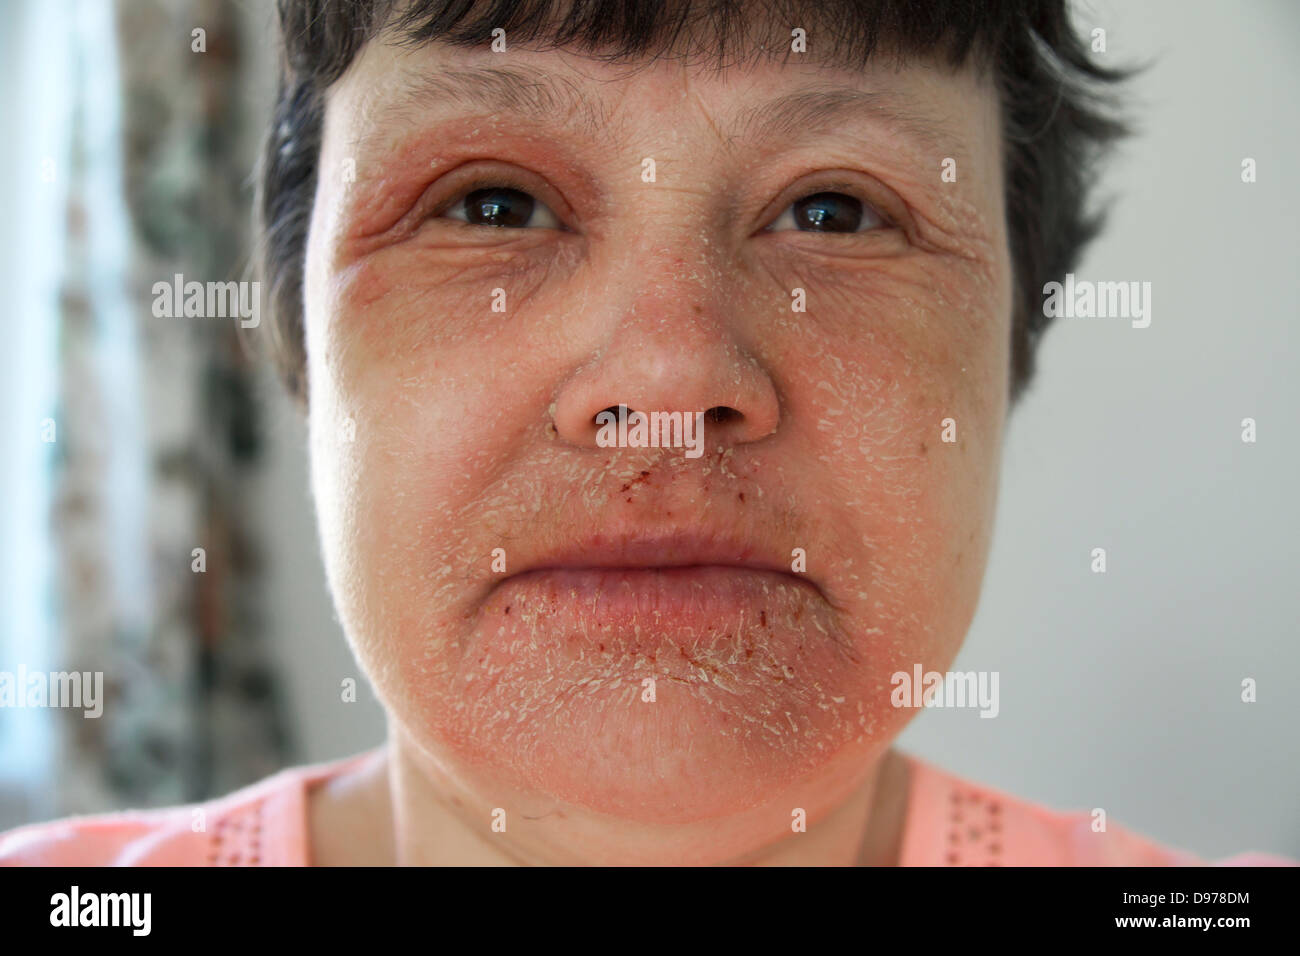 Woman suffering with eczema & a rash covering most of the face with the soreness surrounding & affecting the eyes & mouth area Stock Photo